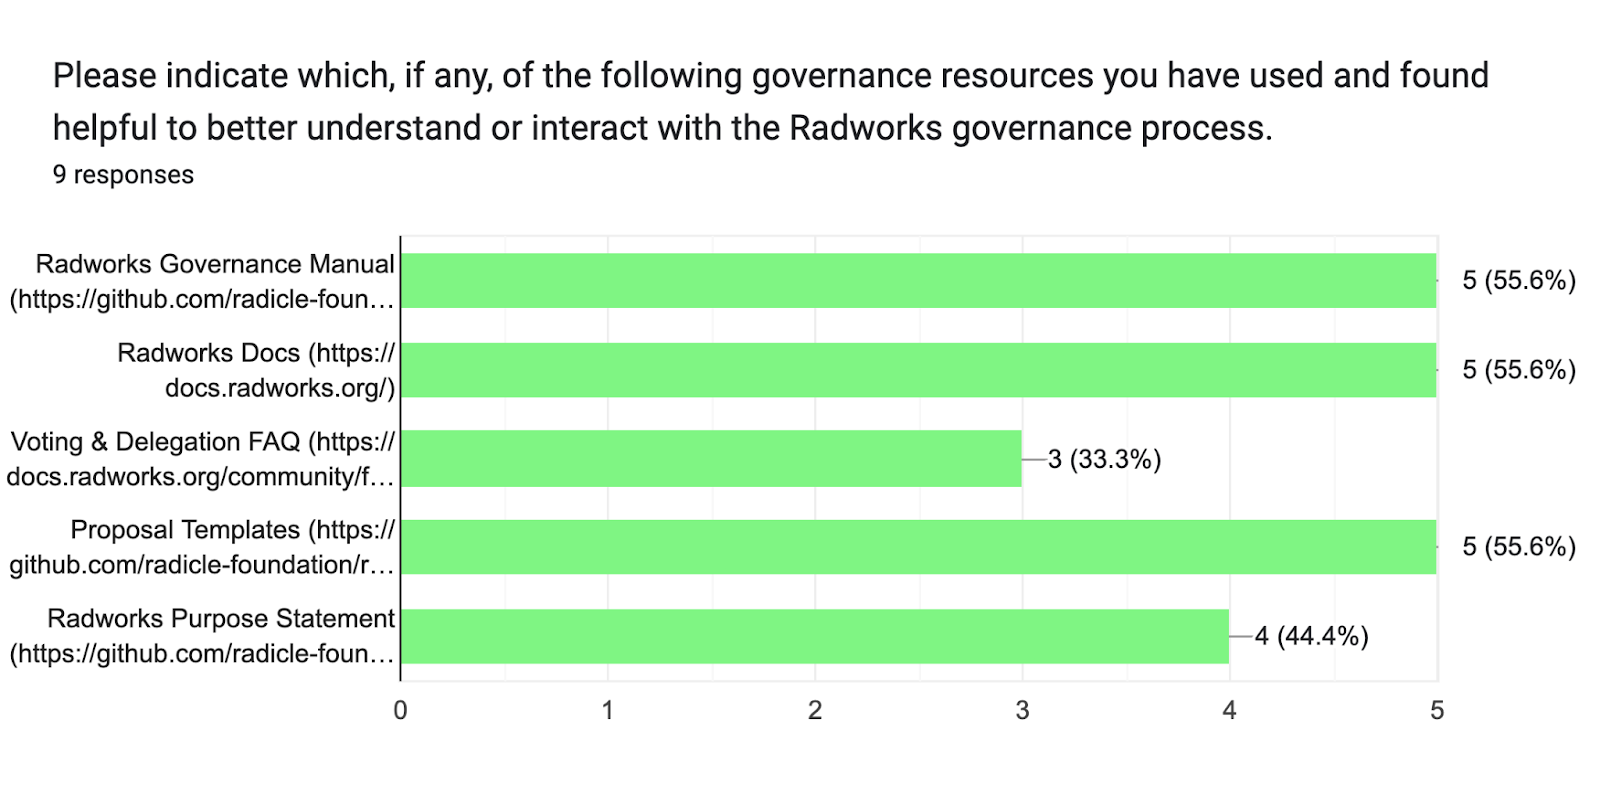 Forms response chart. Question title: Please indicate which, if any, of the following governance resources you have used and found helpful to better understand or interact with the Radworks governance process.. Number of responses: 9 responses.